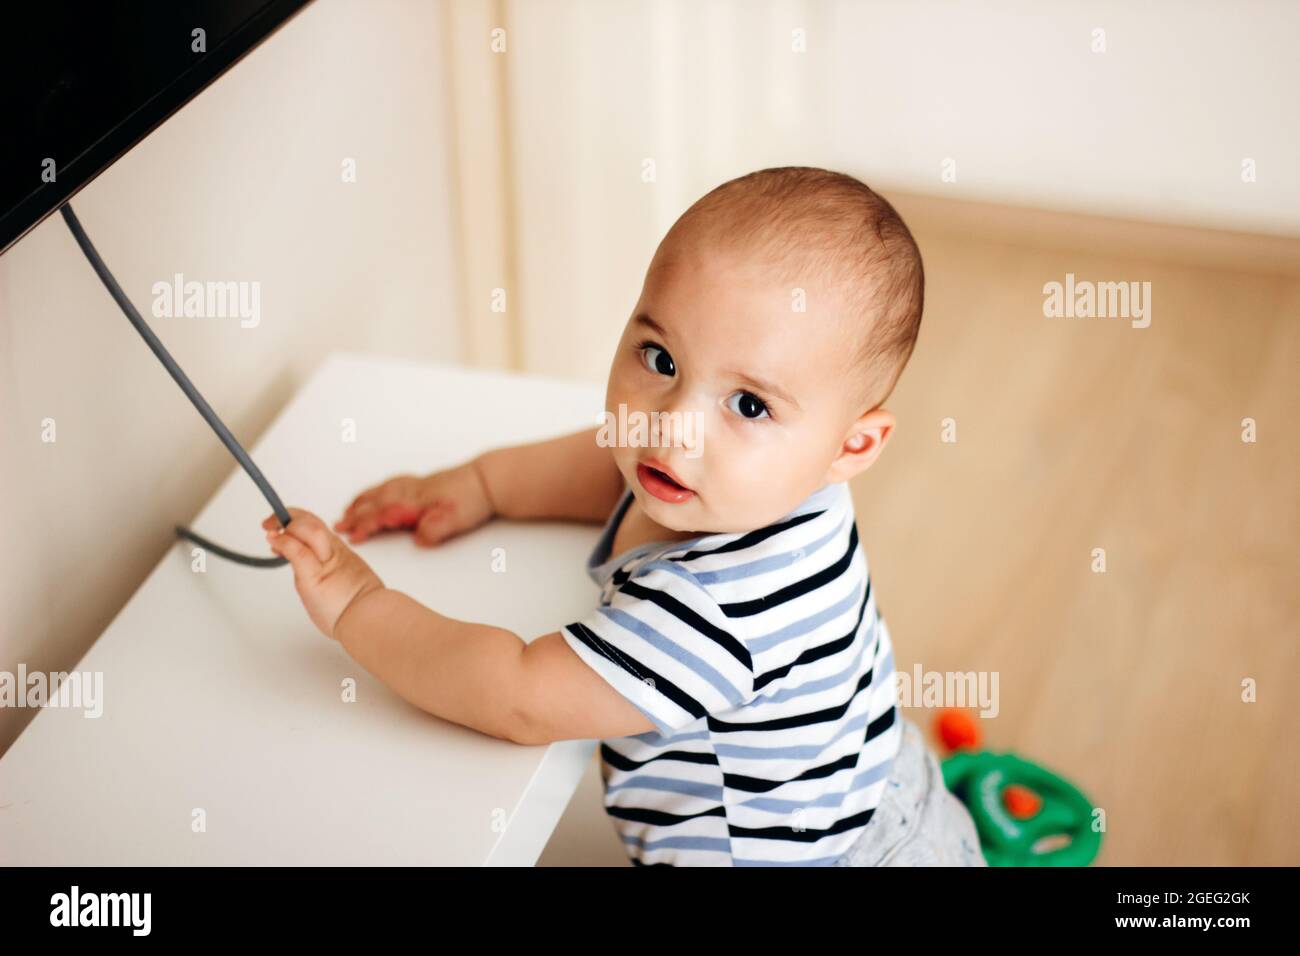 Sweet naughty baby boy pulls the electric cord from TV Stock Photo